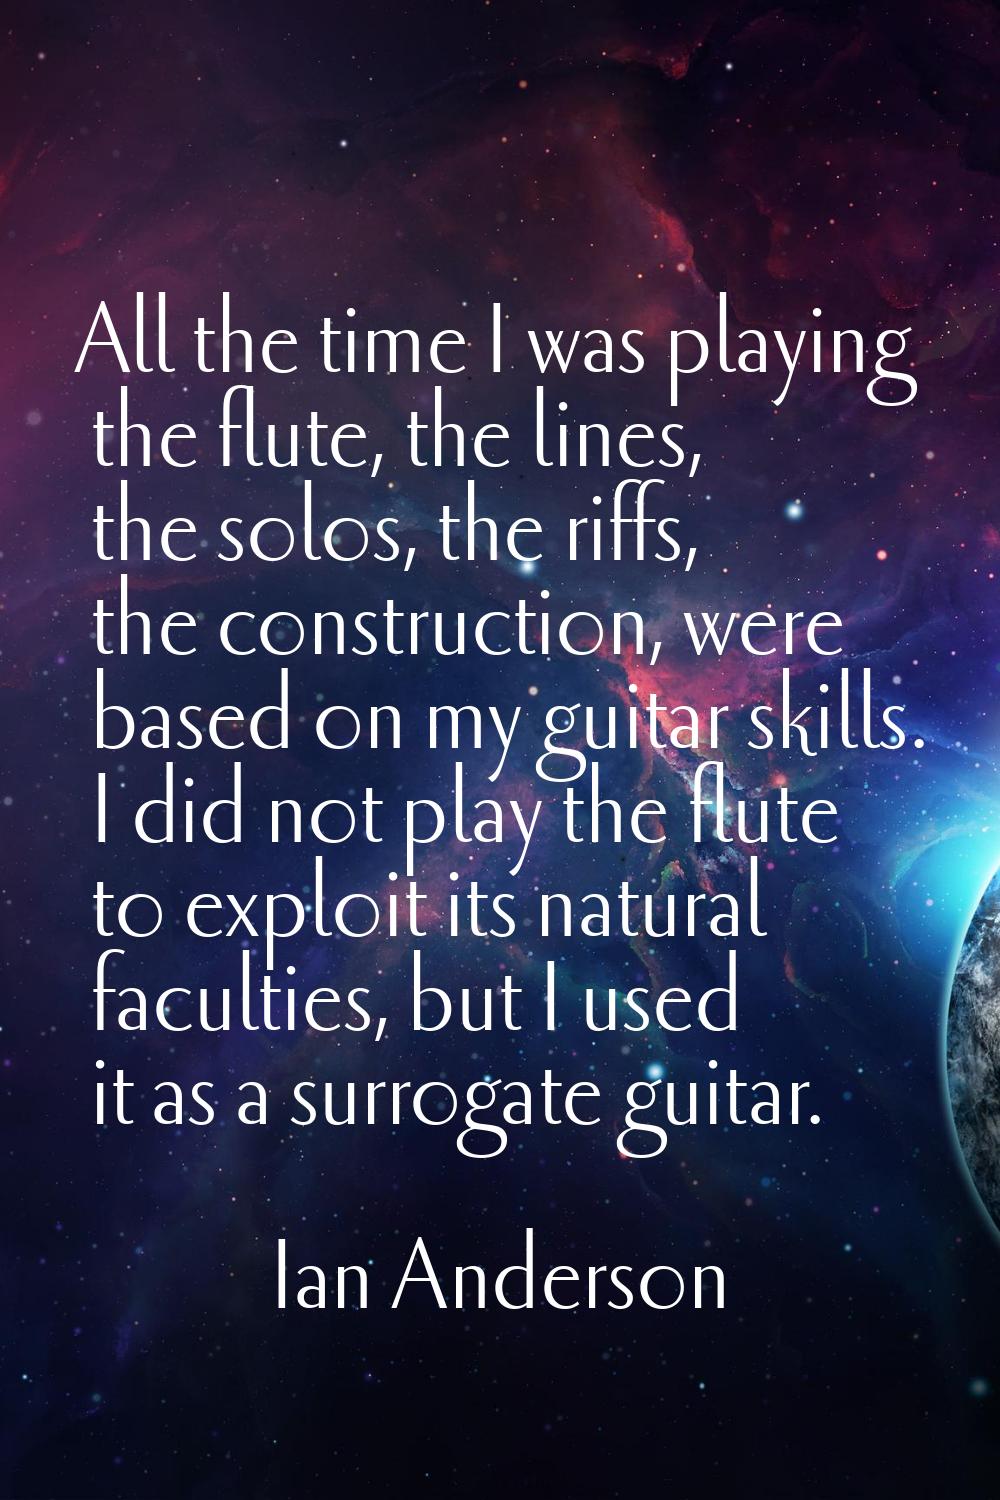 All the time I was playing the flute, the lines, the solos, the riffs, the construction, were based